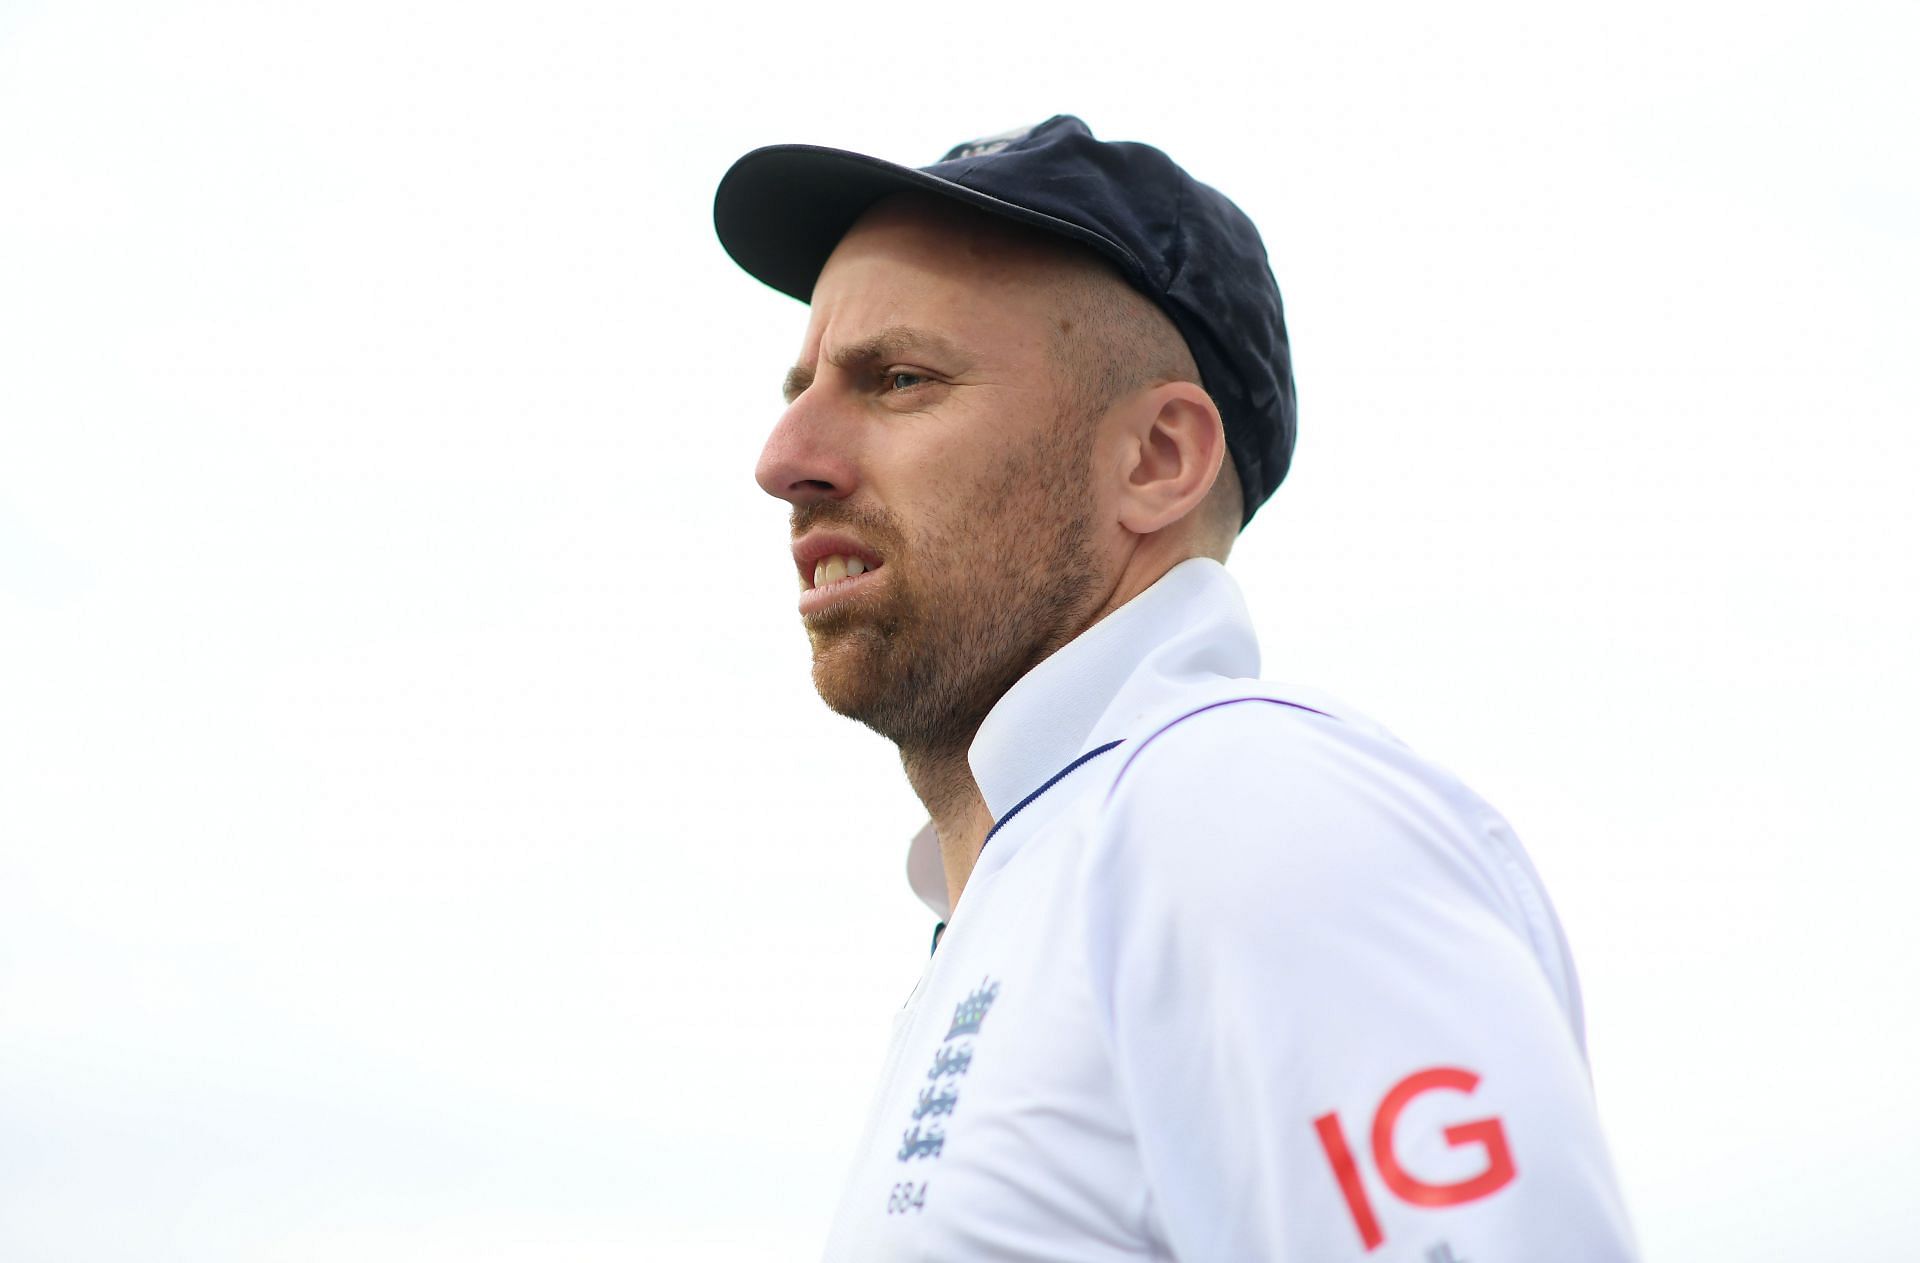 Jack Leach picked up two wickets. (Image Credits: Getty)